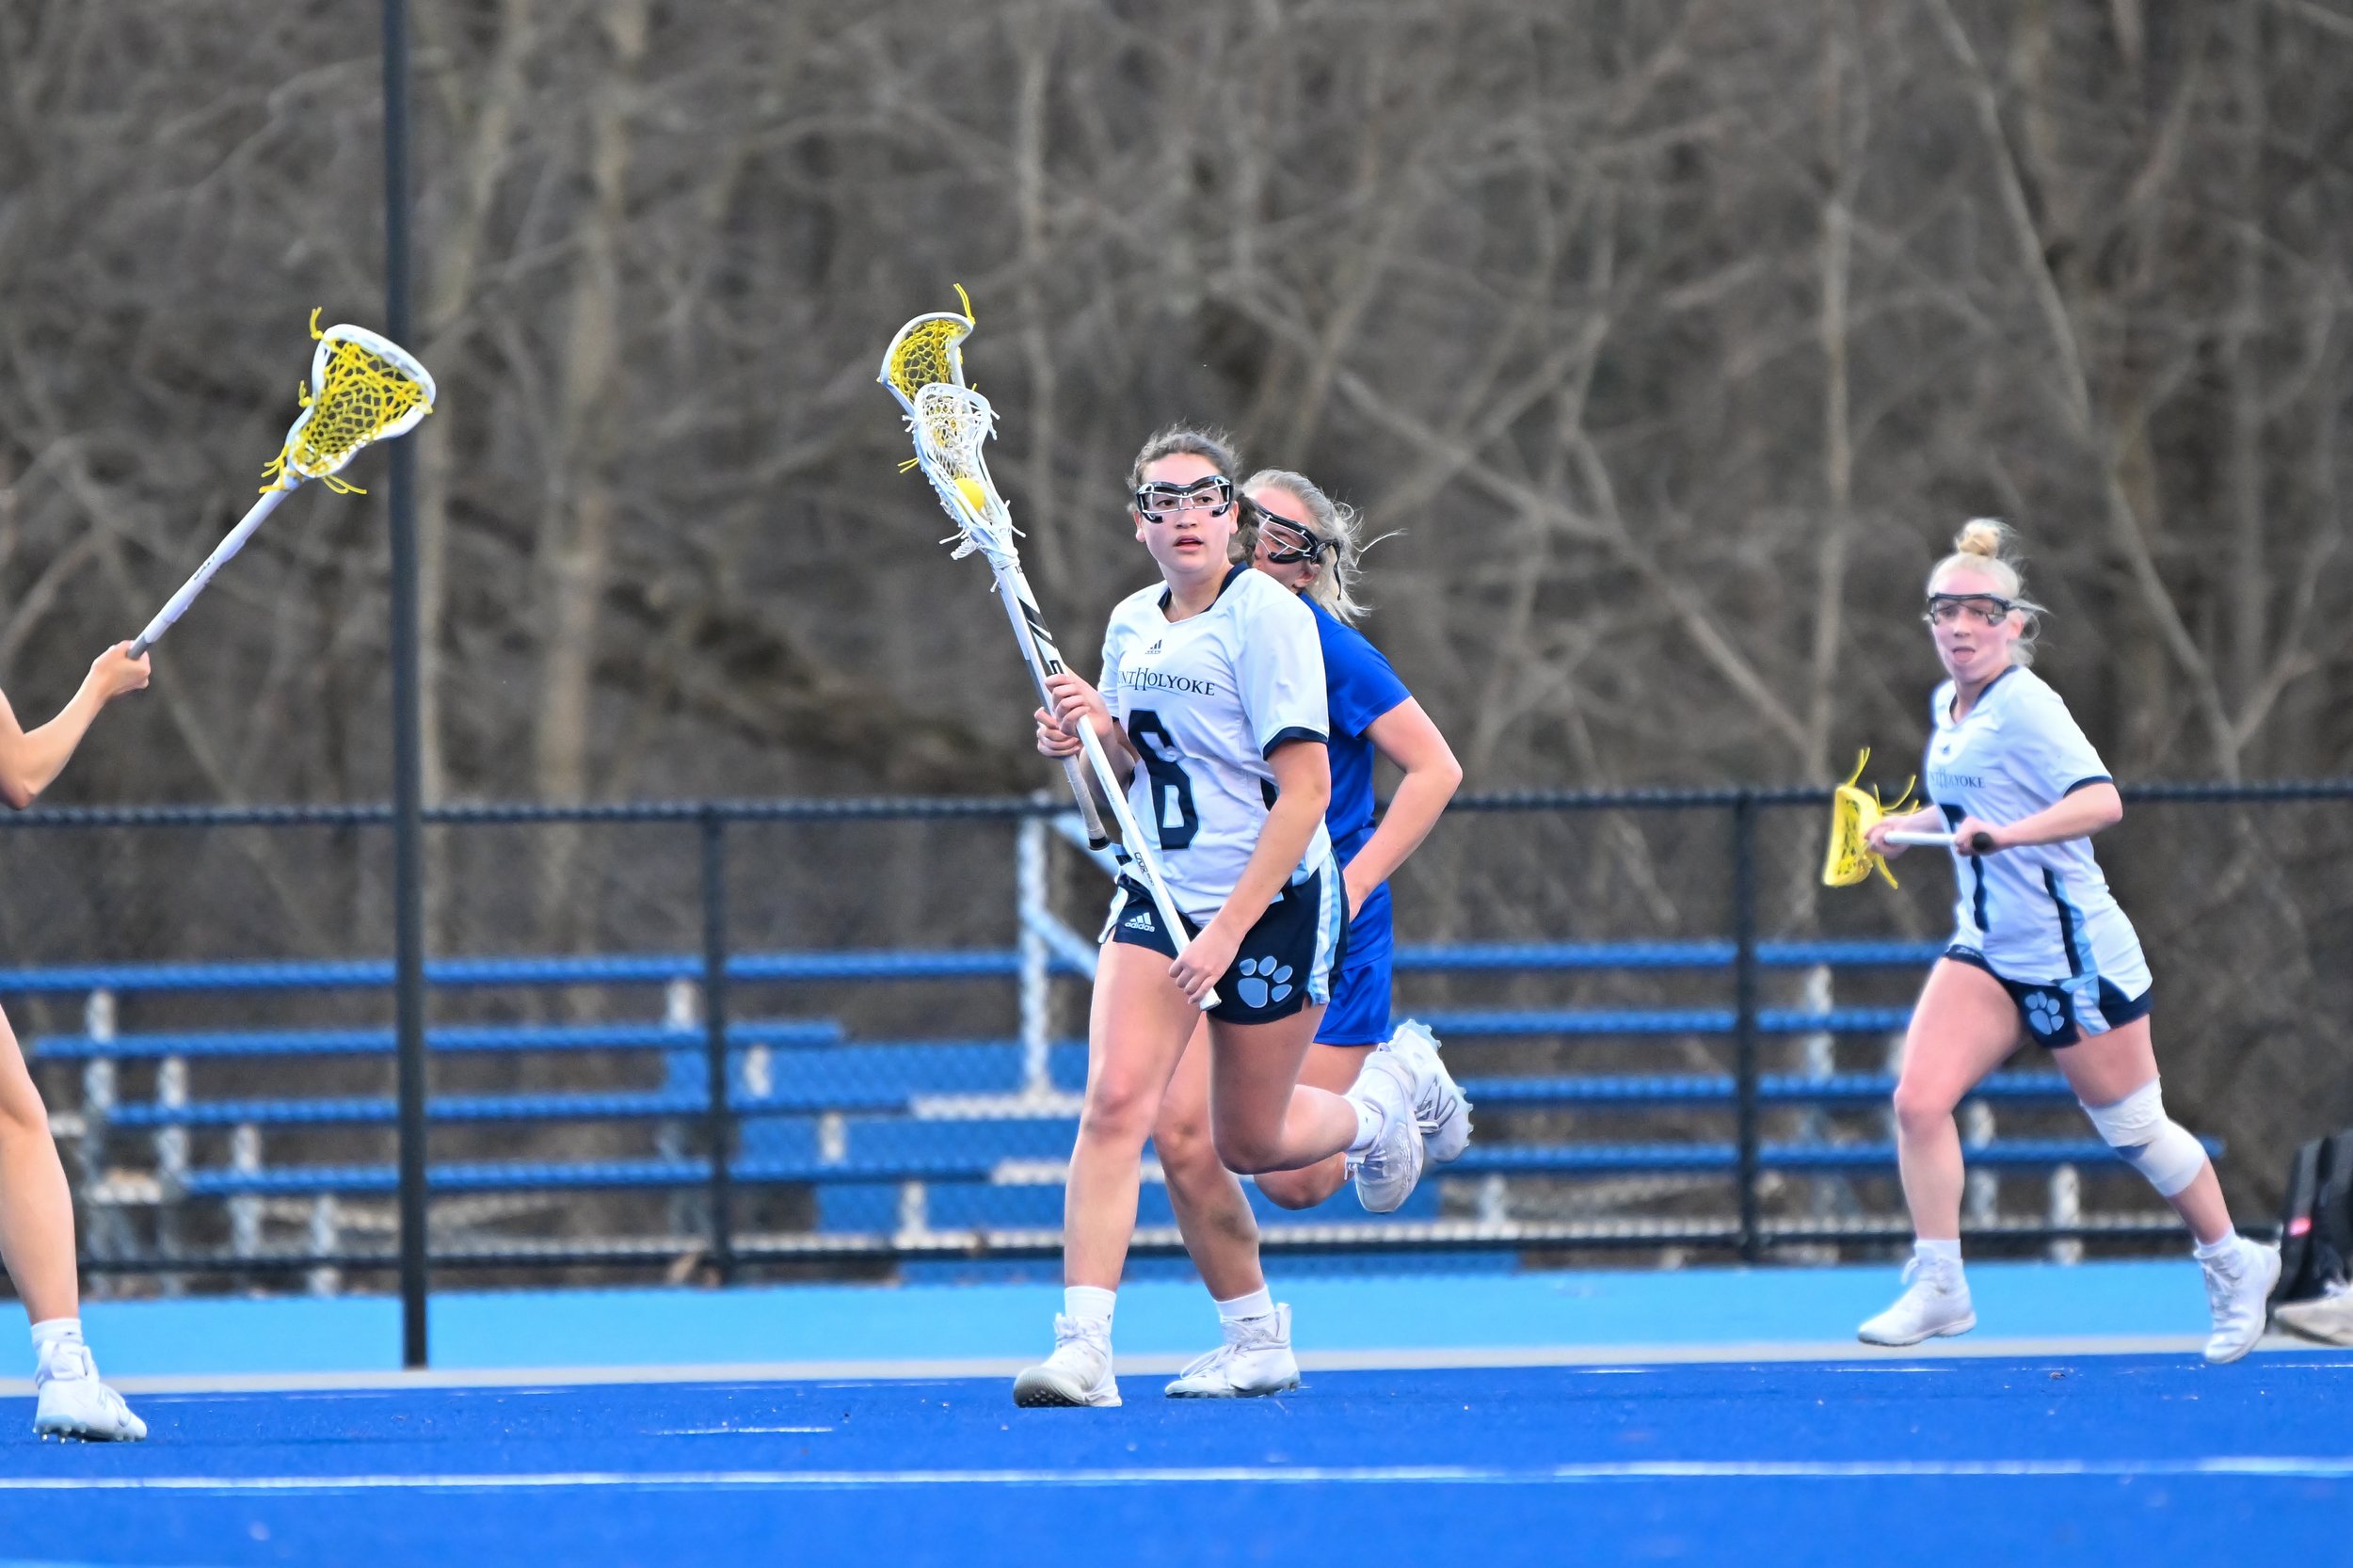 Mount Holyoke Lacrosse’s Hannah Bisson ’24 scores career-high 7 goals in matchup at Wellesley College